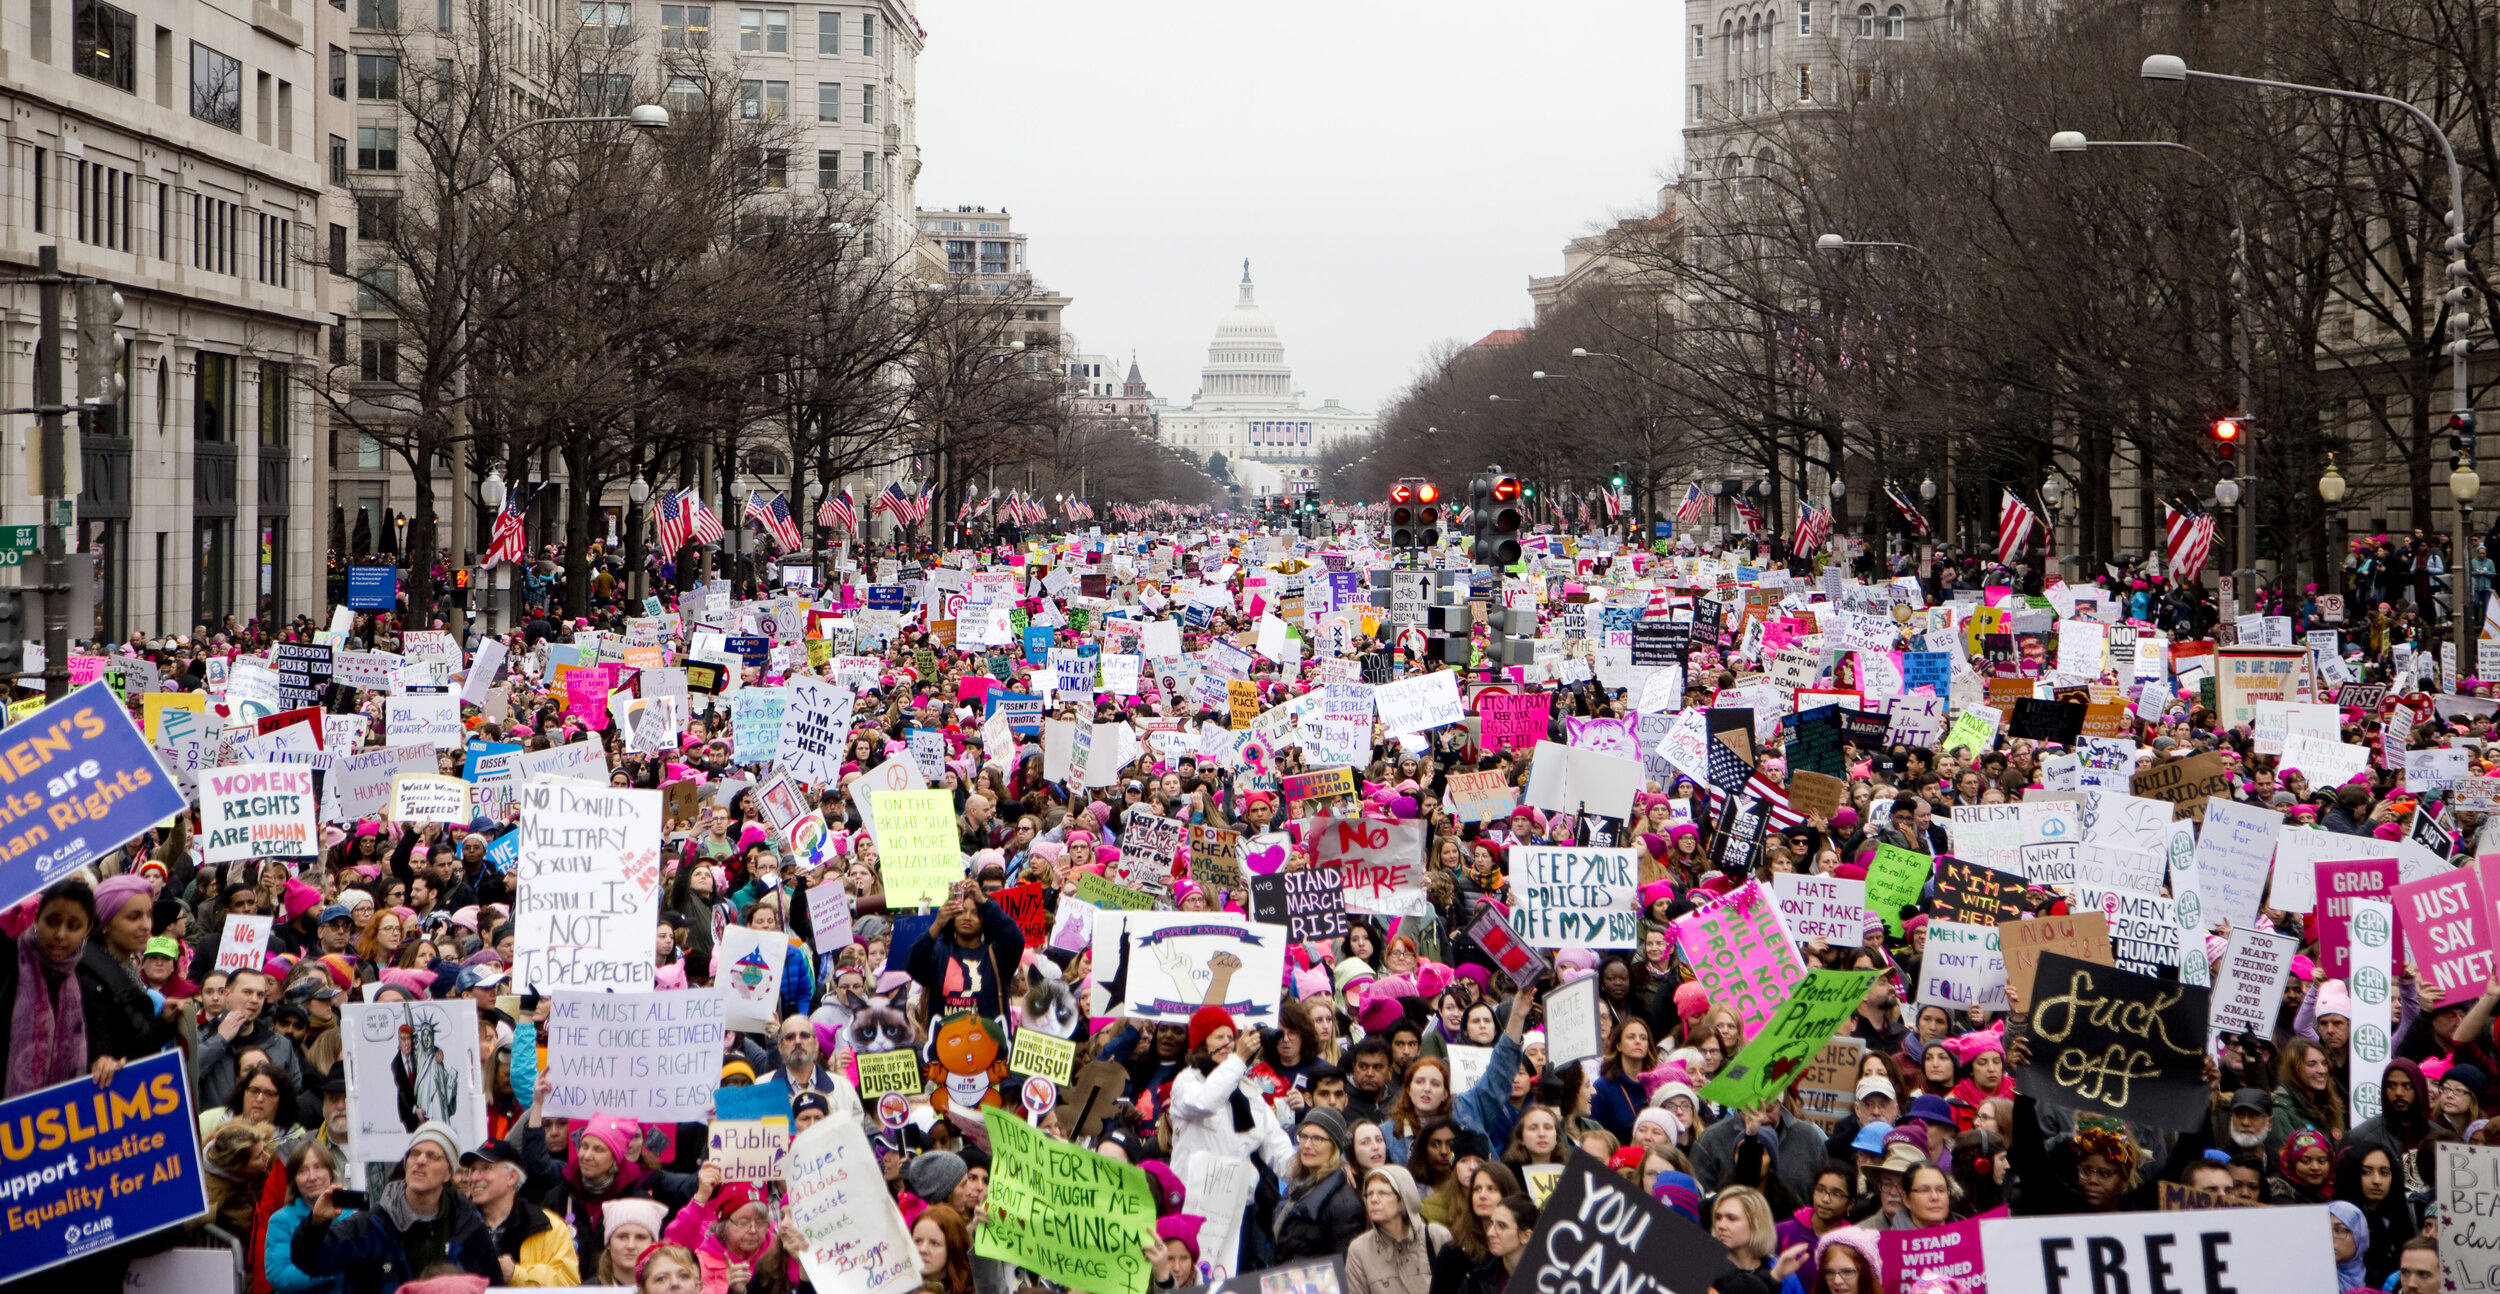 The Women's March was a worldwide protest on January 21, 2017, the day after the inauguration of President Donald Trump